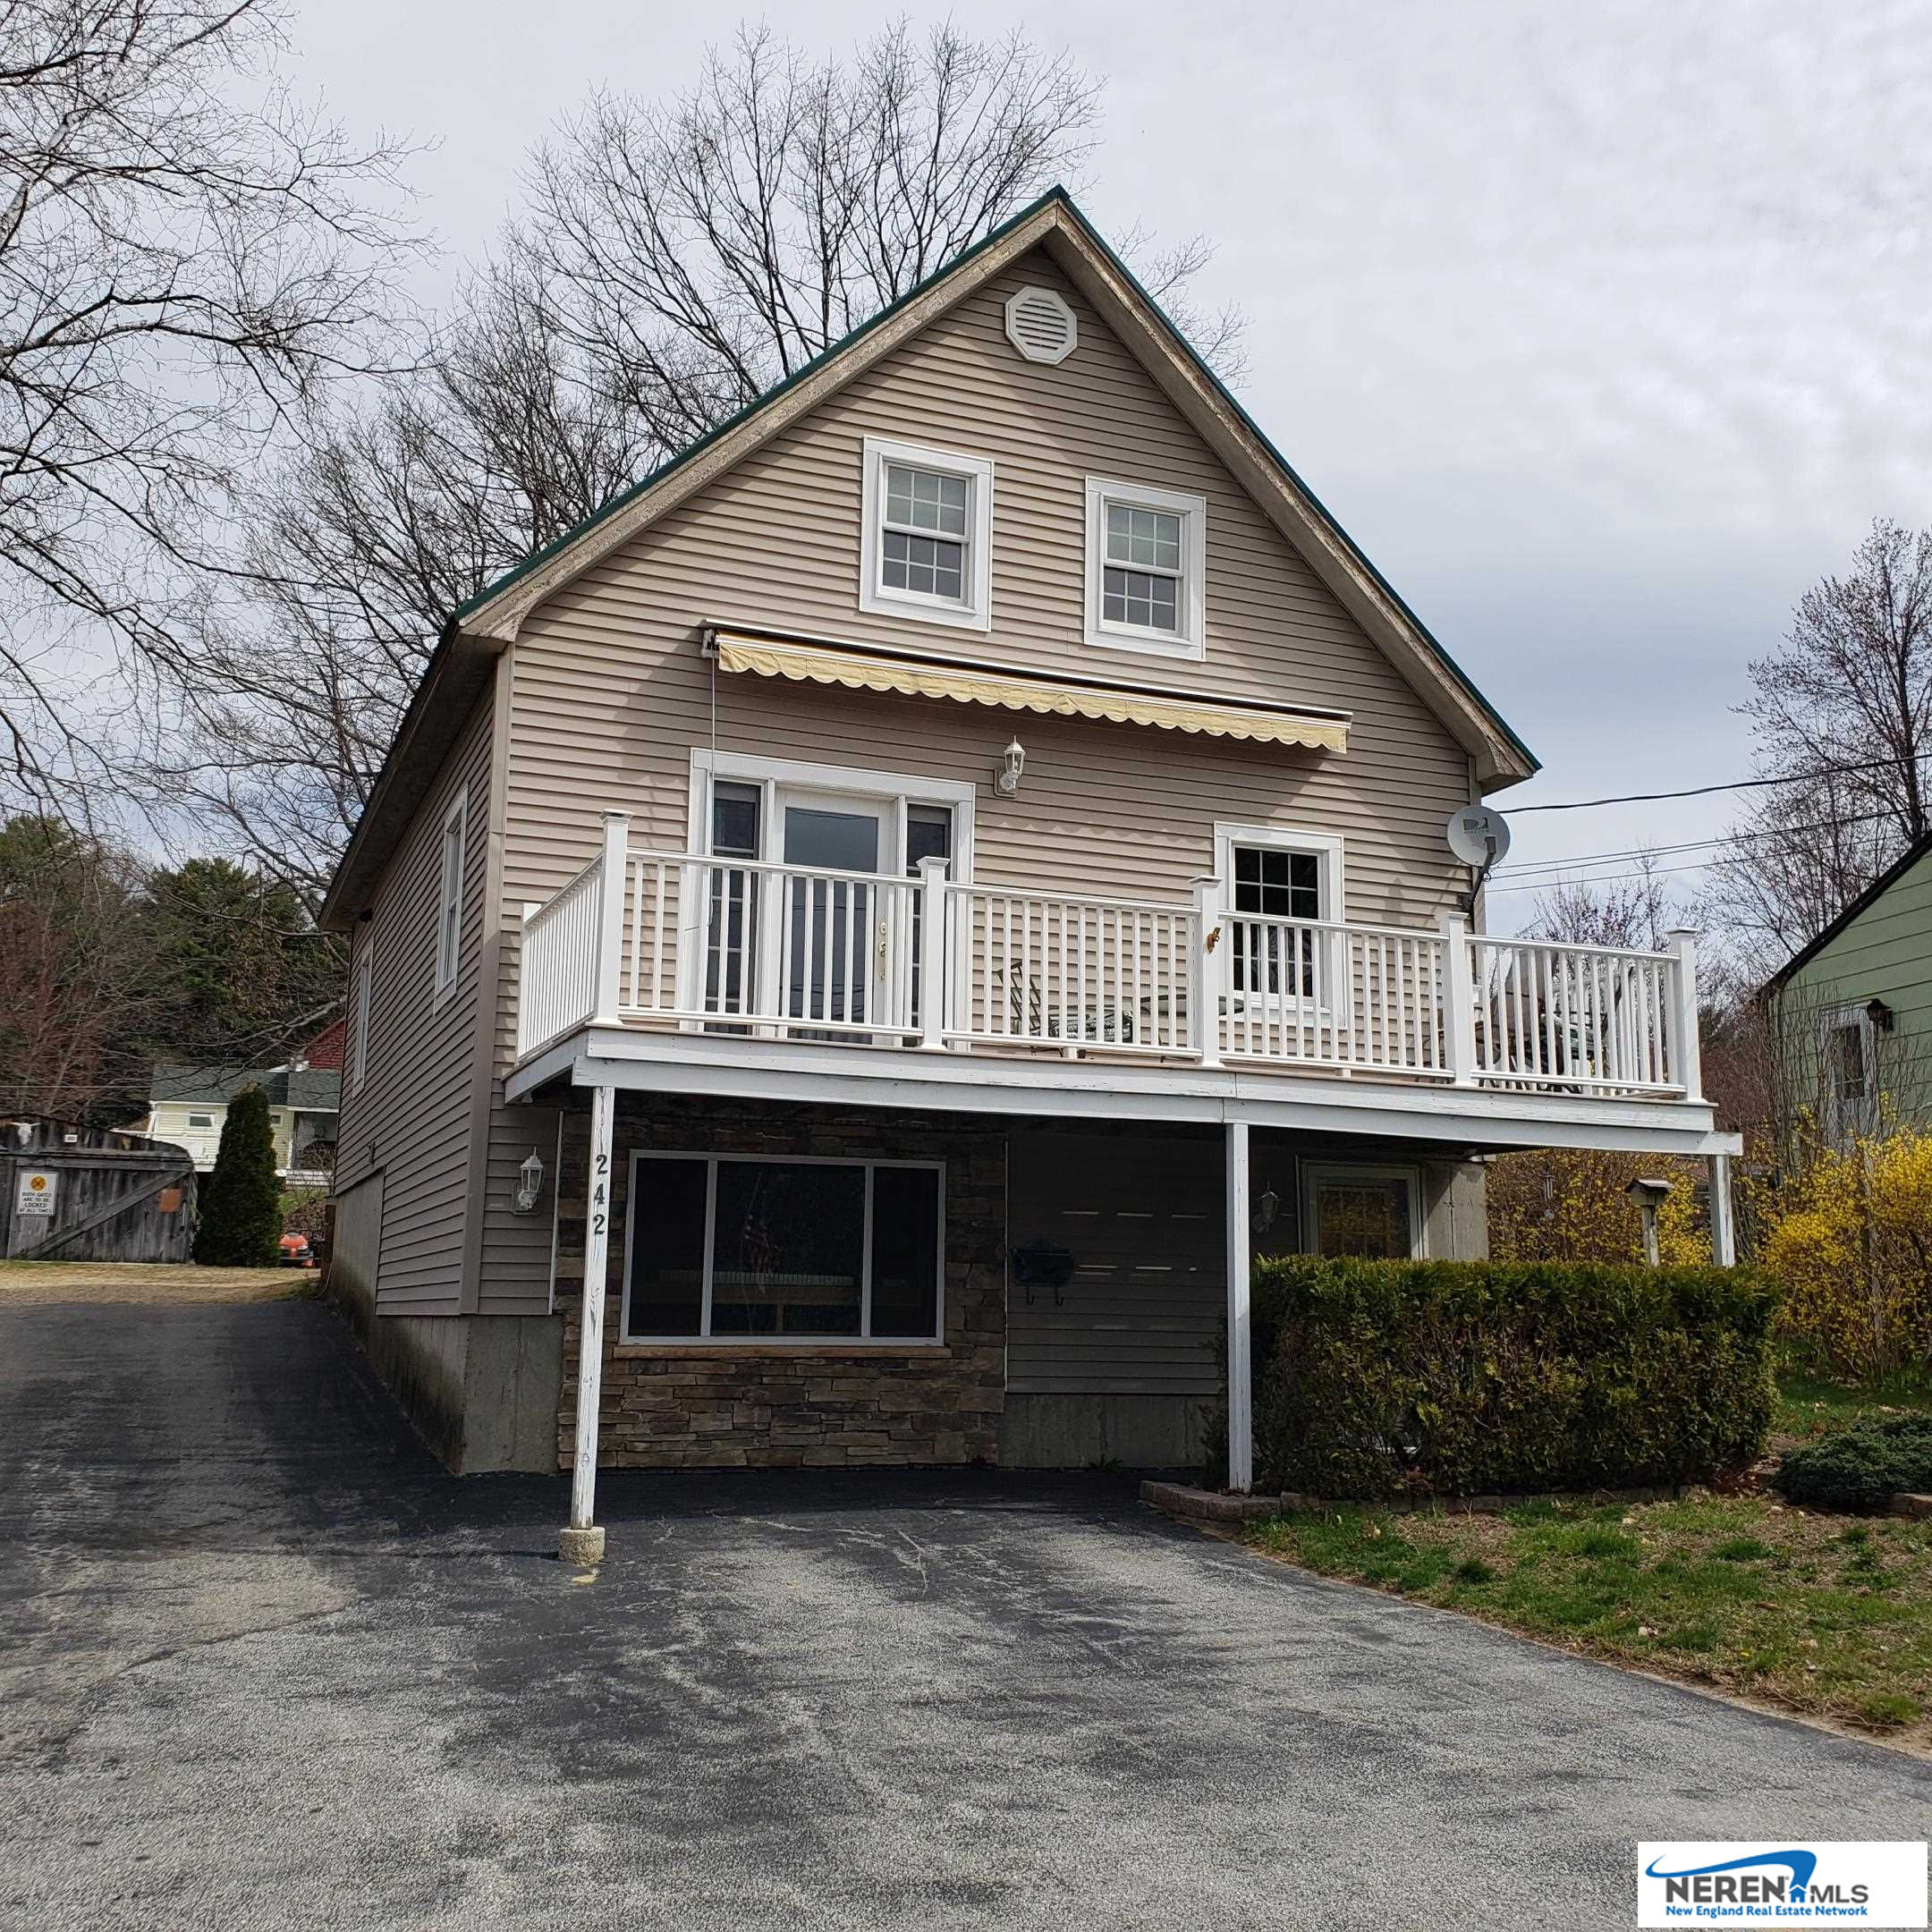 242 Pine Street Extension, Laconia, NH 03246